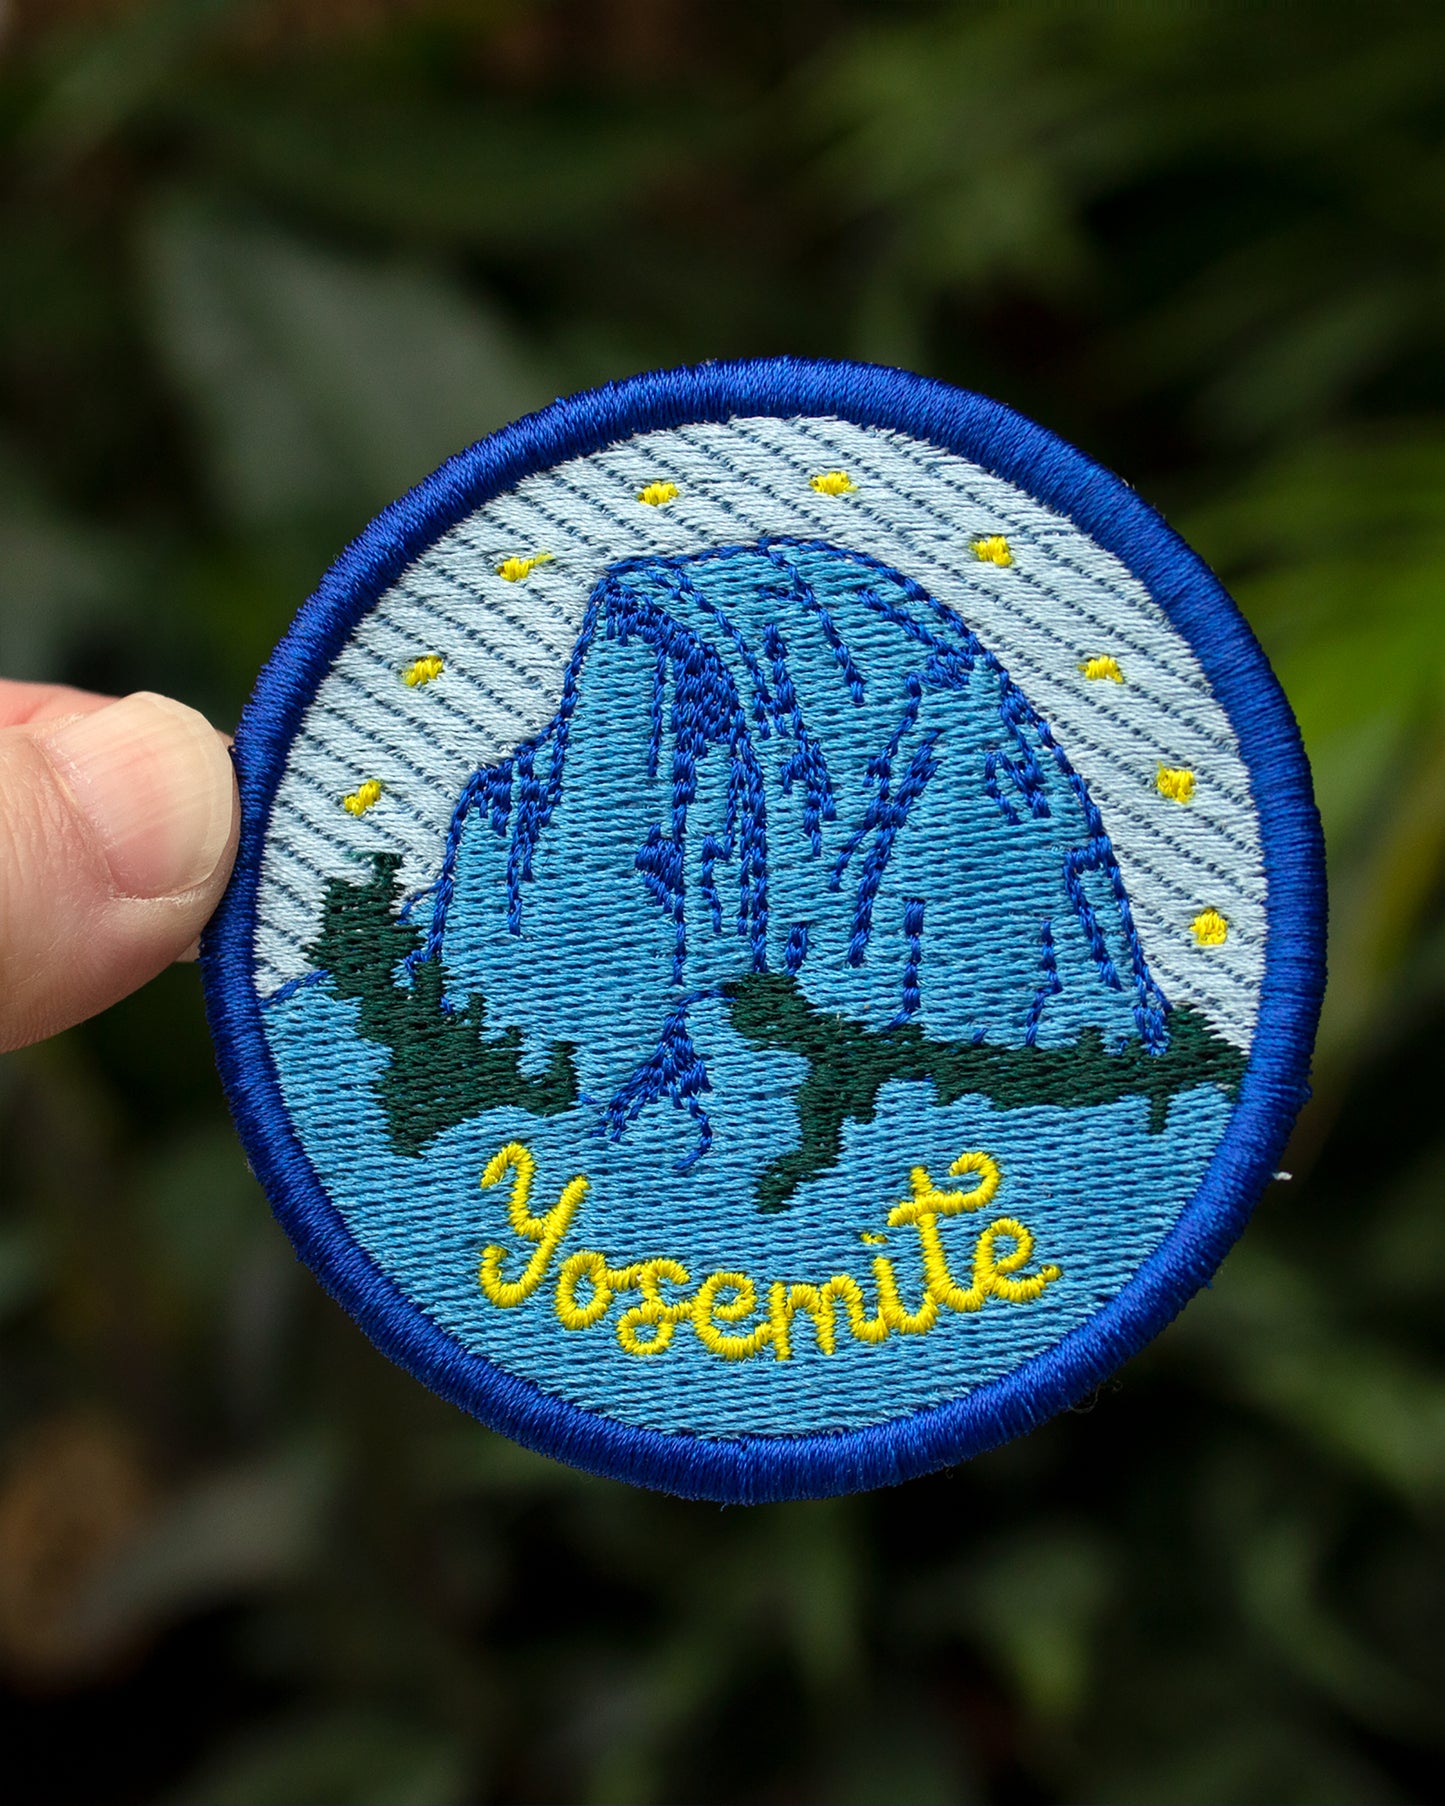 Yosemite Embroidered Patch